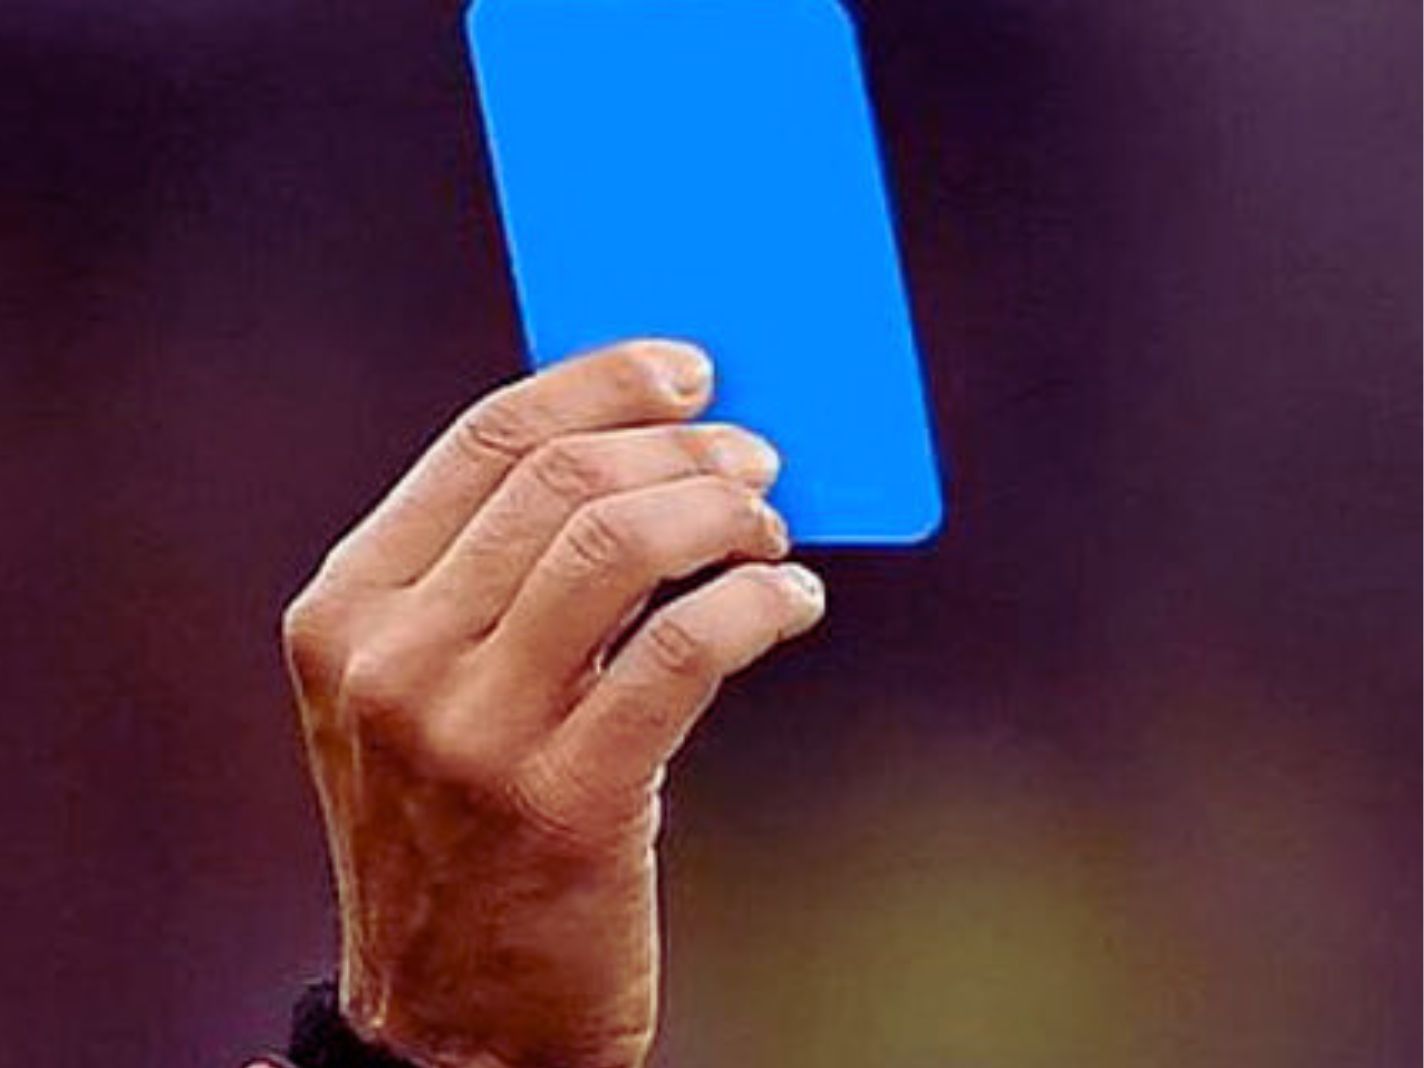 Fans Reject the Idea of Blue Cards in Professional Football